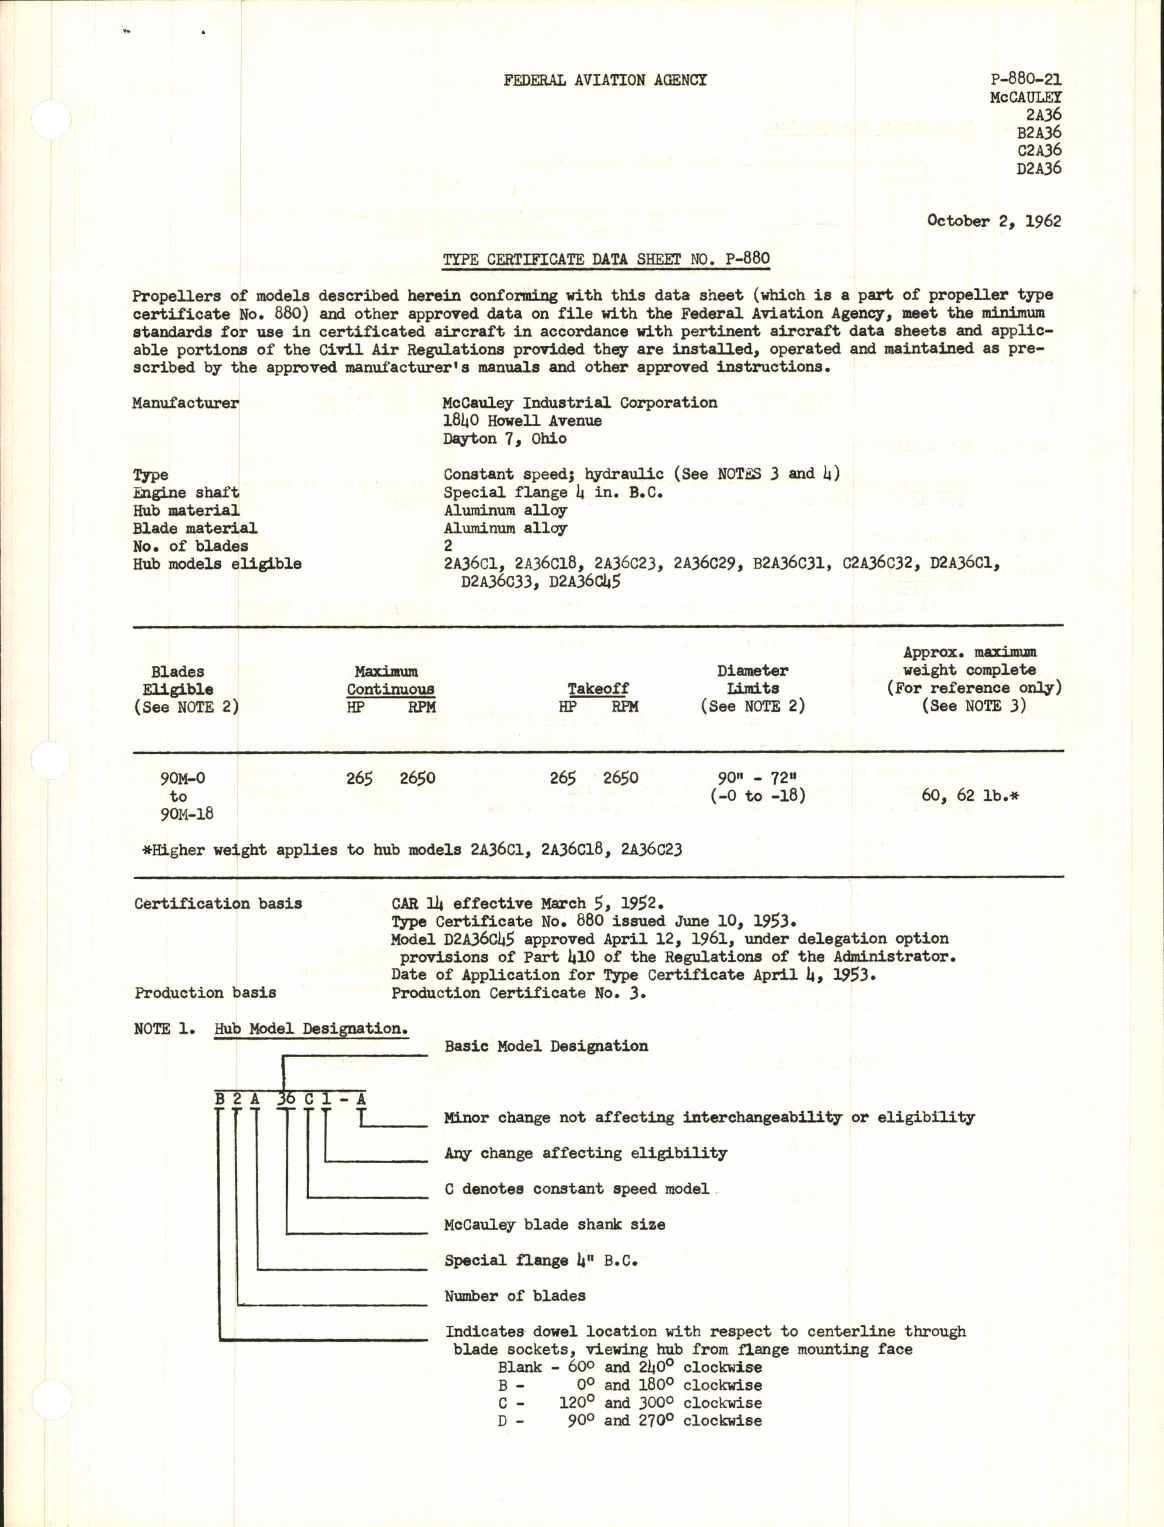 Sample page 1 from AirCorps Library document: 2A36, B2A36, C2A36, and D2A36 - Type Certificate 